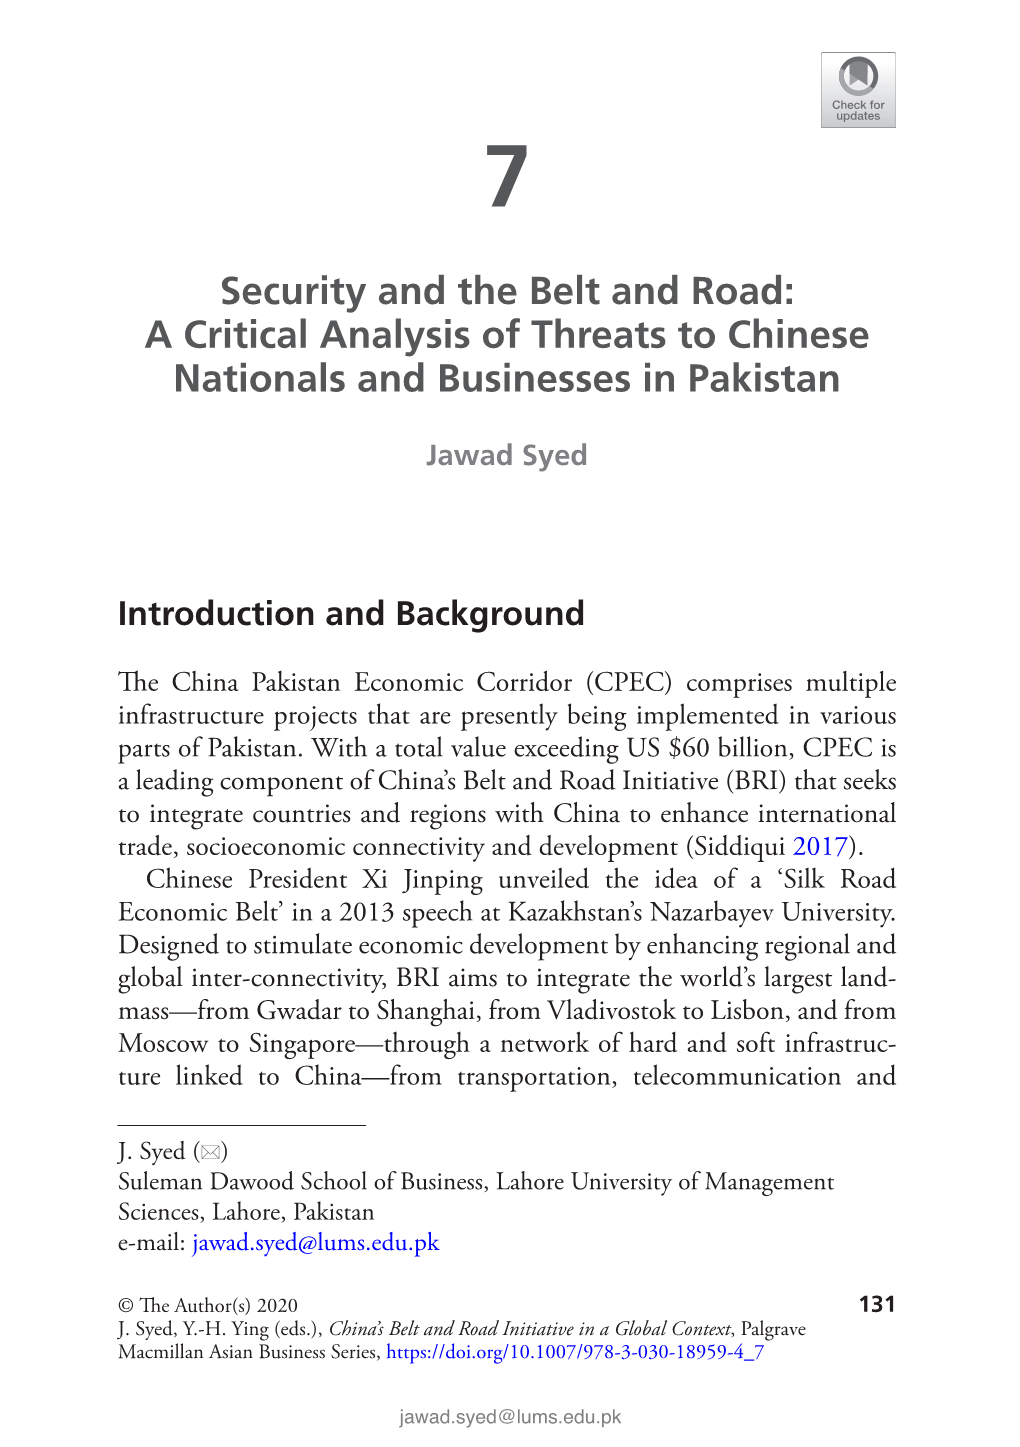 Syed-2020-Security-Threats-To-CPEC